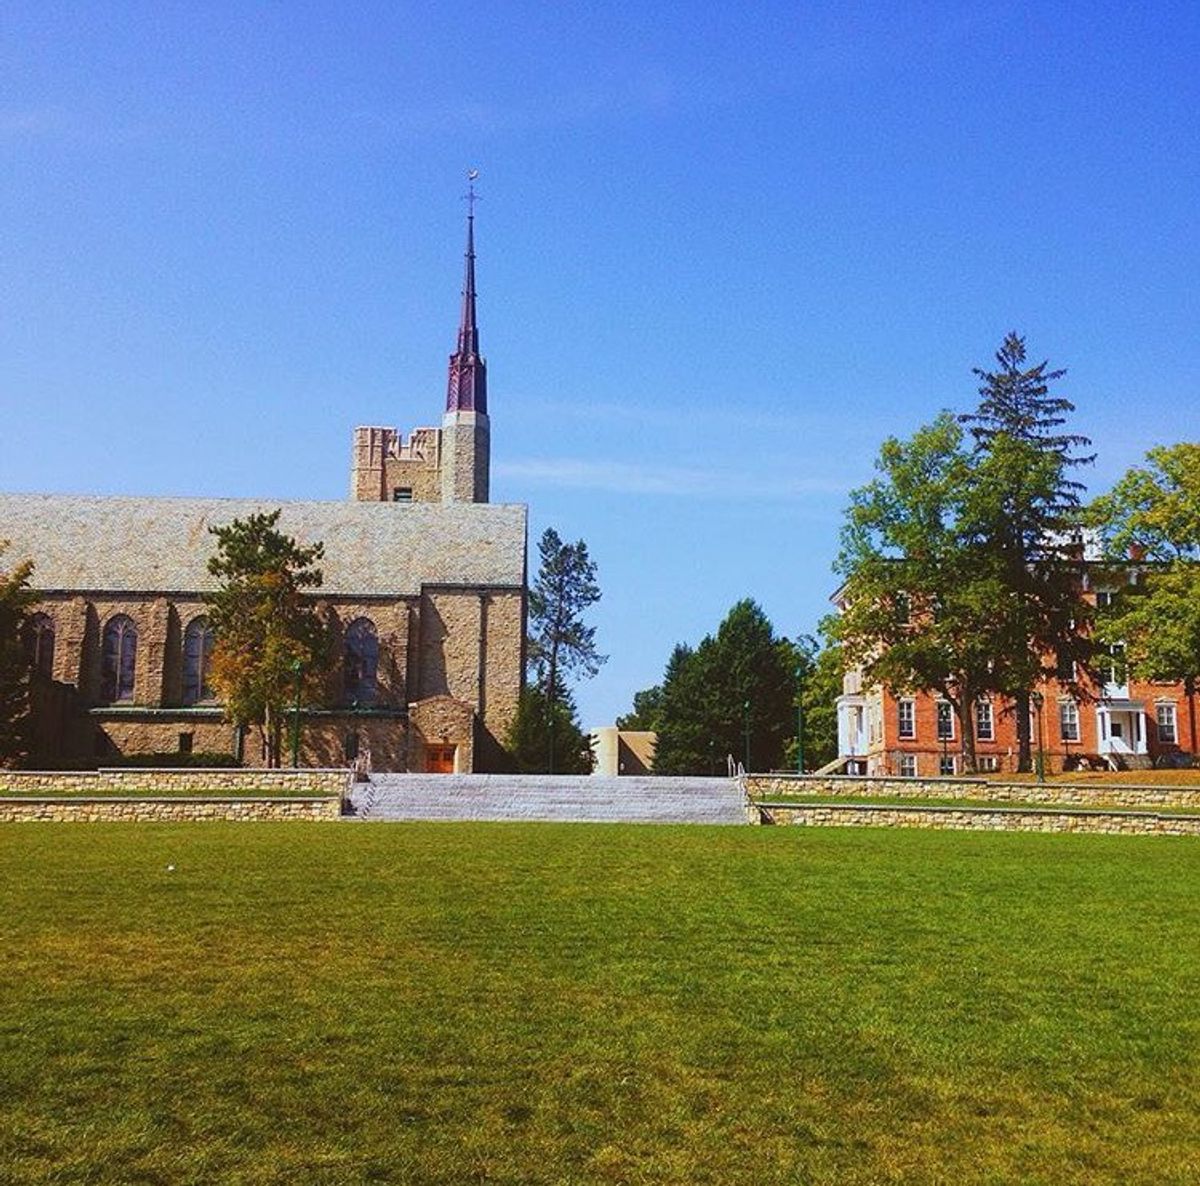 14 Things That Make St. Lawrence University Unique